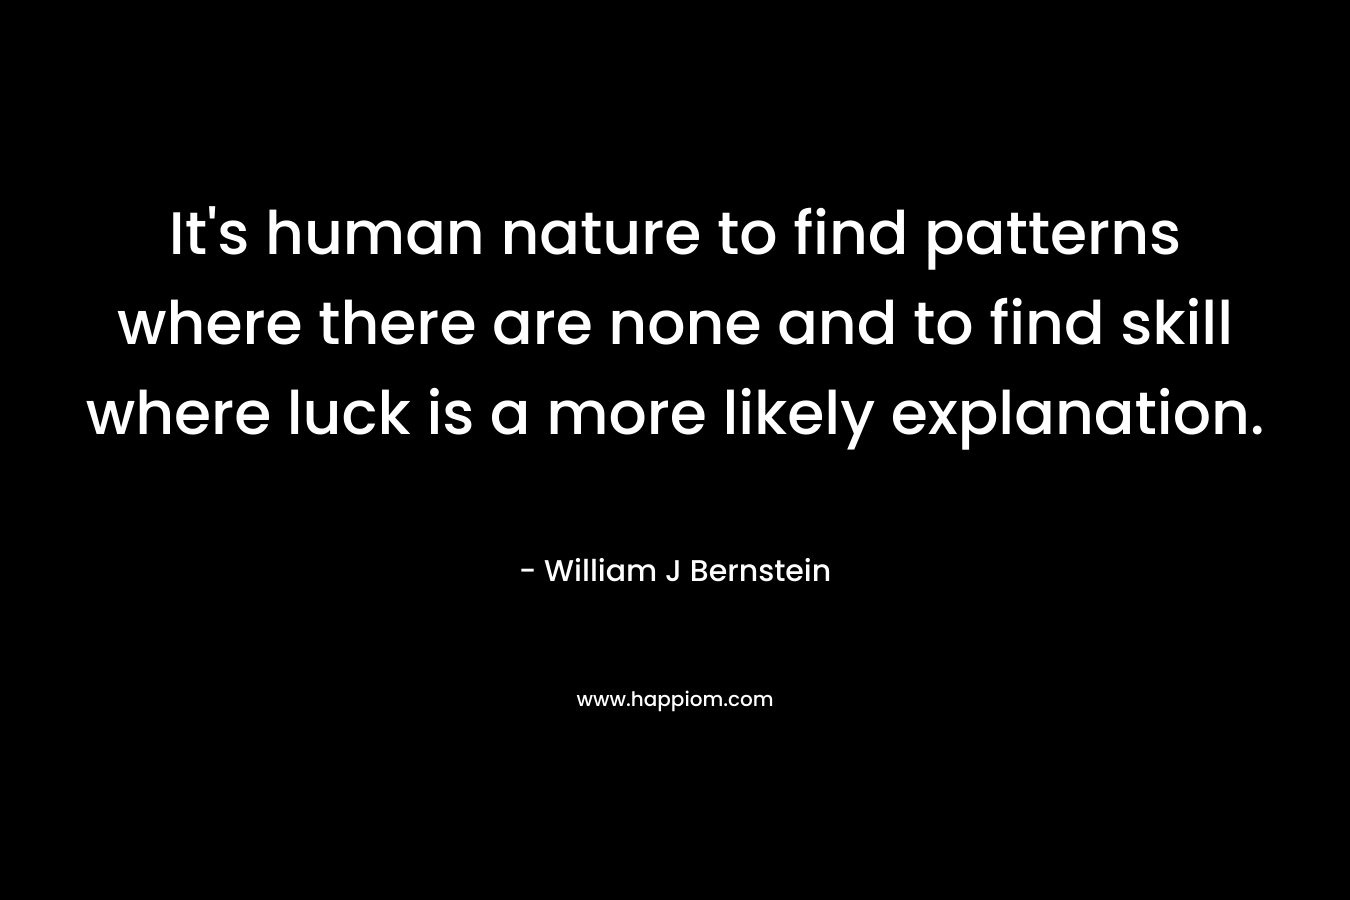 It’s human nature to find patterns where there are none and to find skill where luck is a more likely explanation. – William J Bernstein